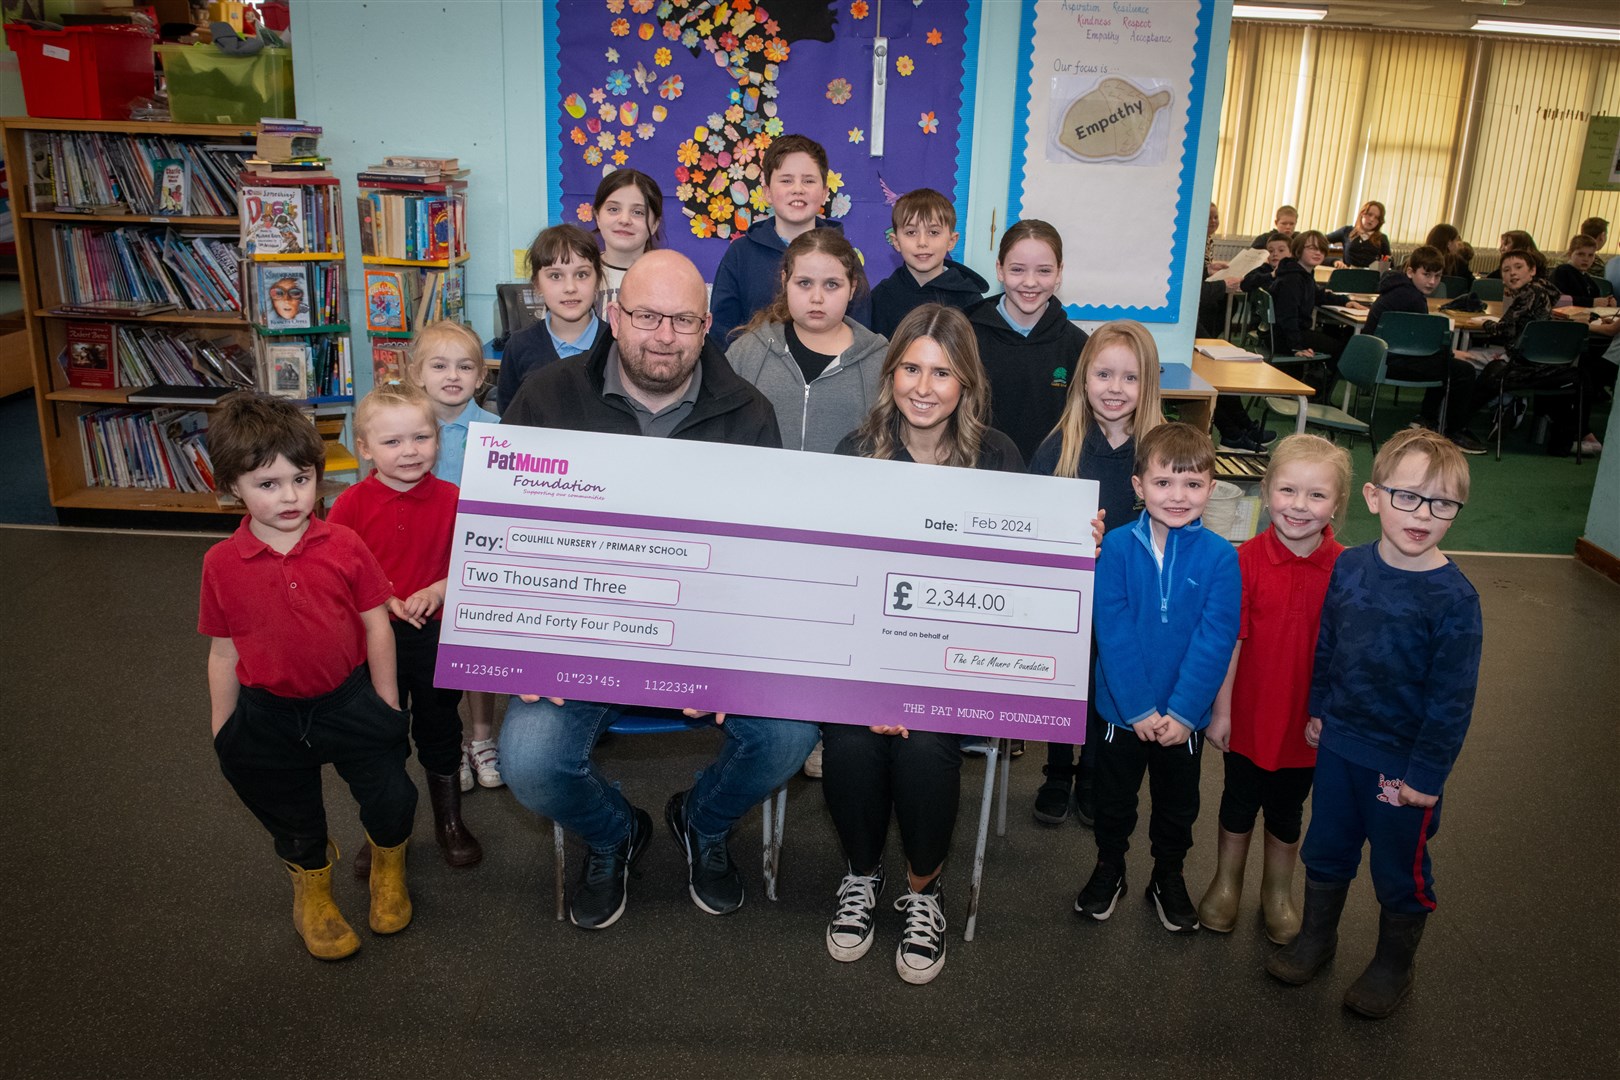 Pat Munro contribute new books/tablets to Coulhill Primary/nursery school. Pat Munro's Michael MacDonald and Orla Gilliland with pupils. Picture: Callum Mackay